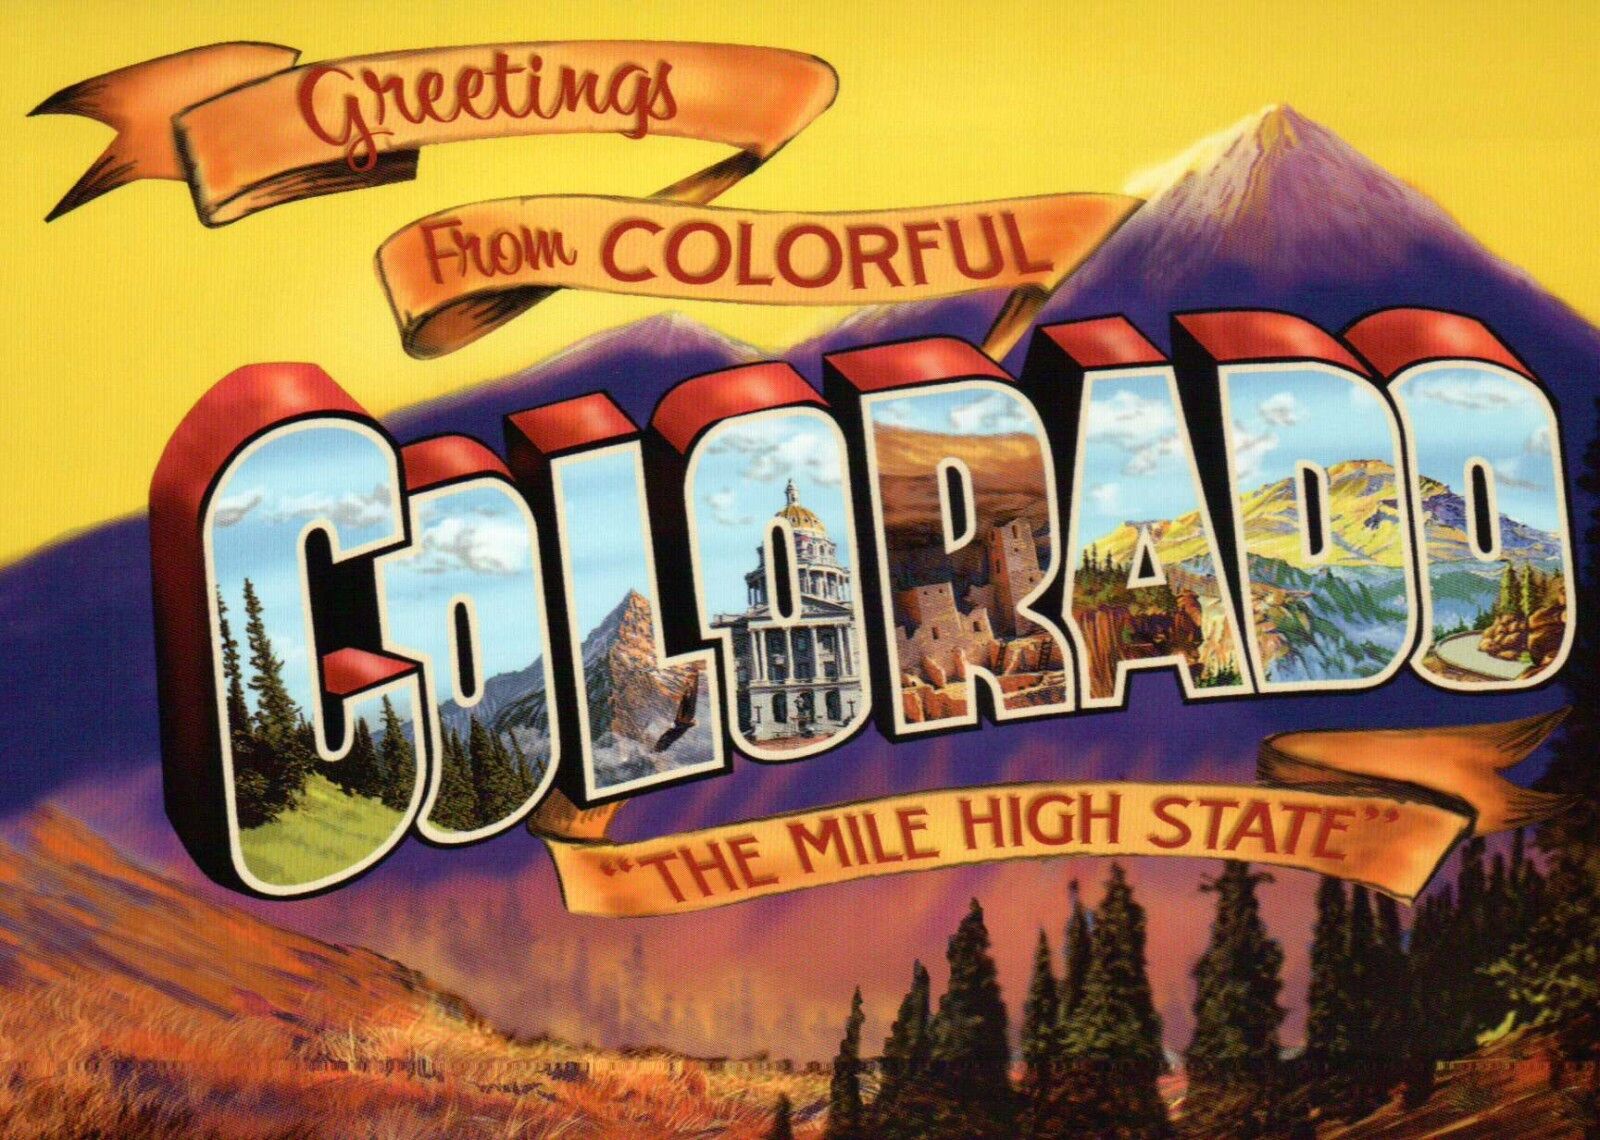 Greetings from Colorful Colorado, Mile High State - Modern Large Letter Postcard